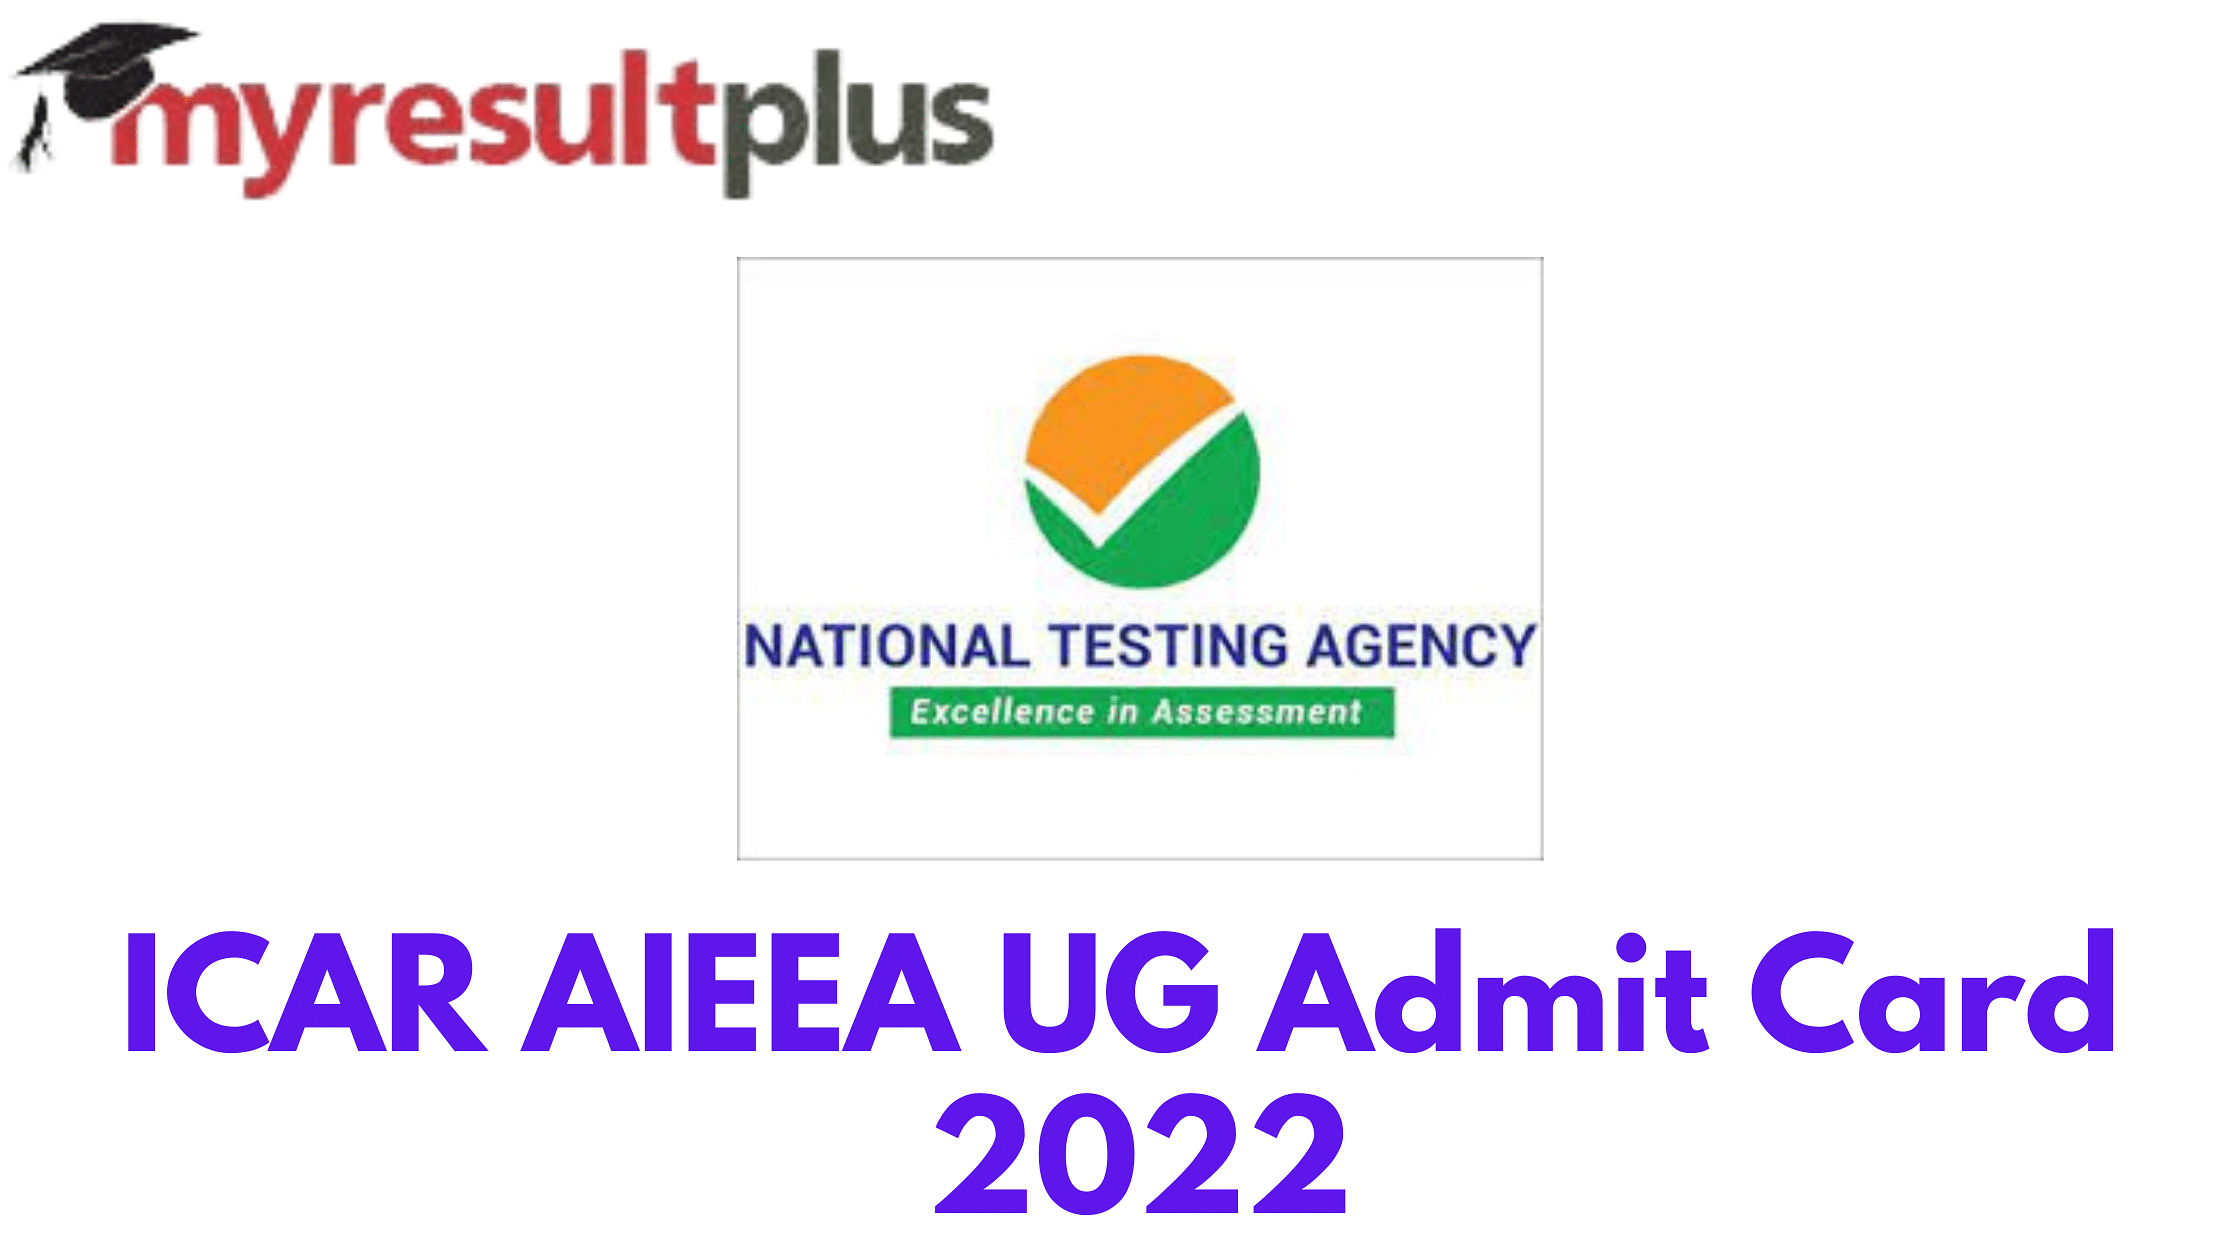 ICAR AIEEA UG Admit Card 2022 Available for Download, Direct Link Here